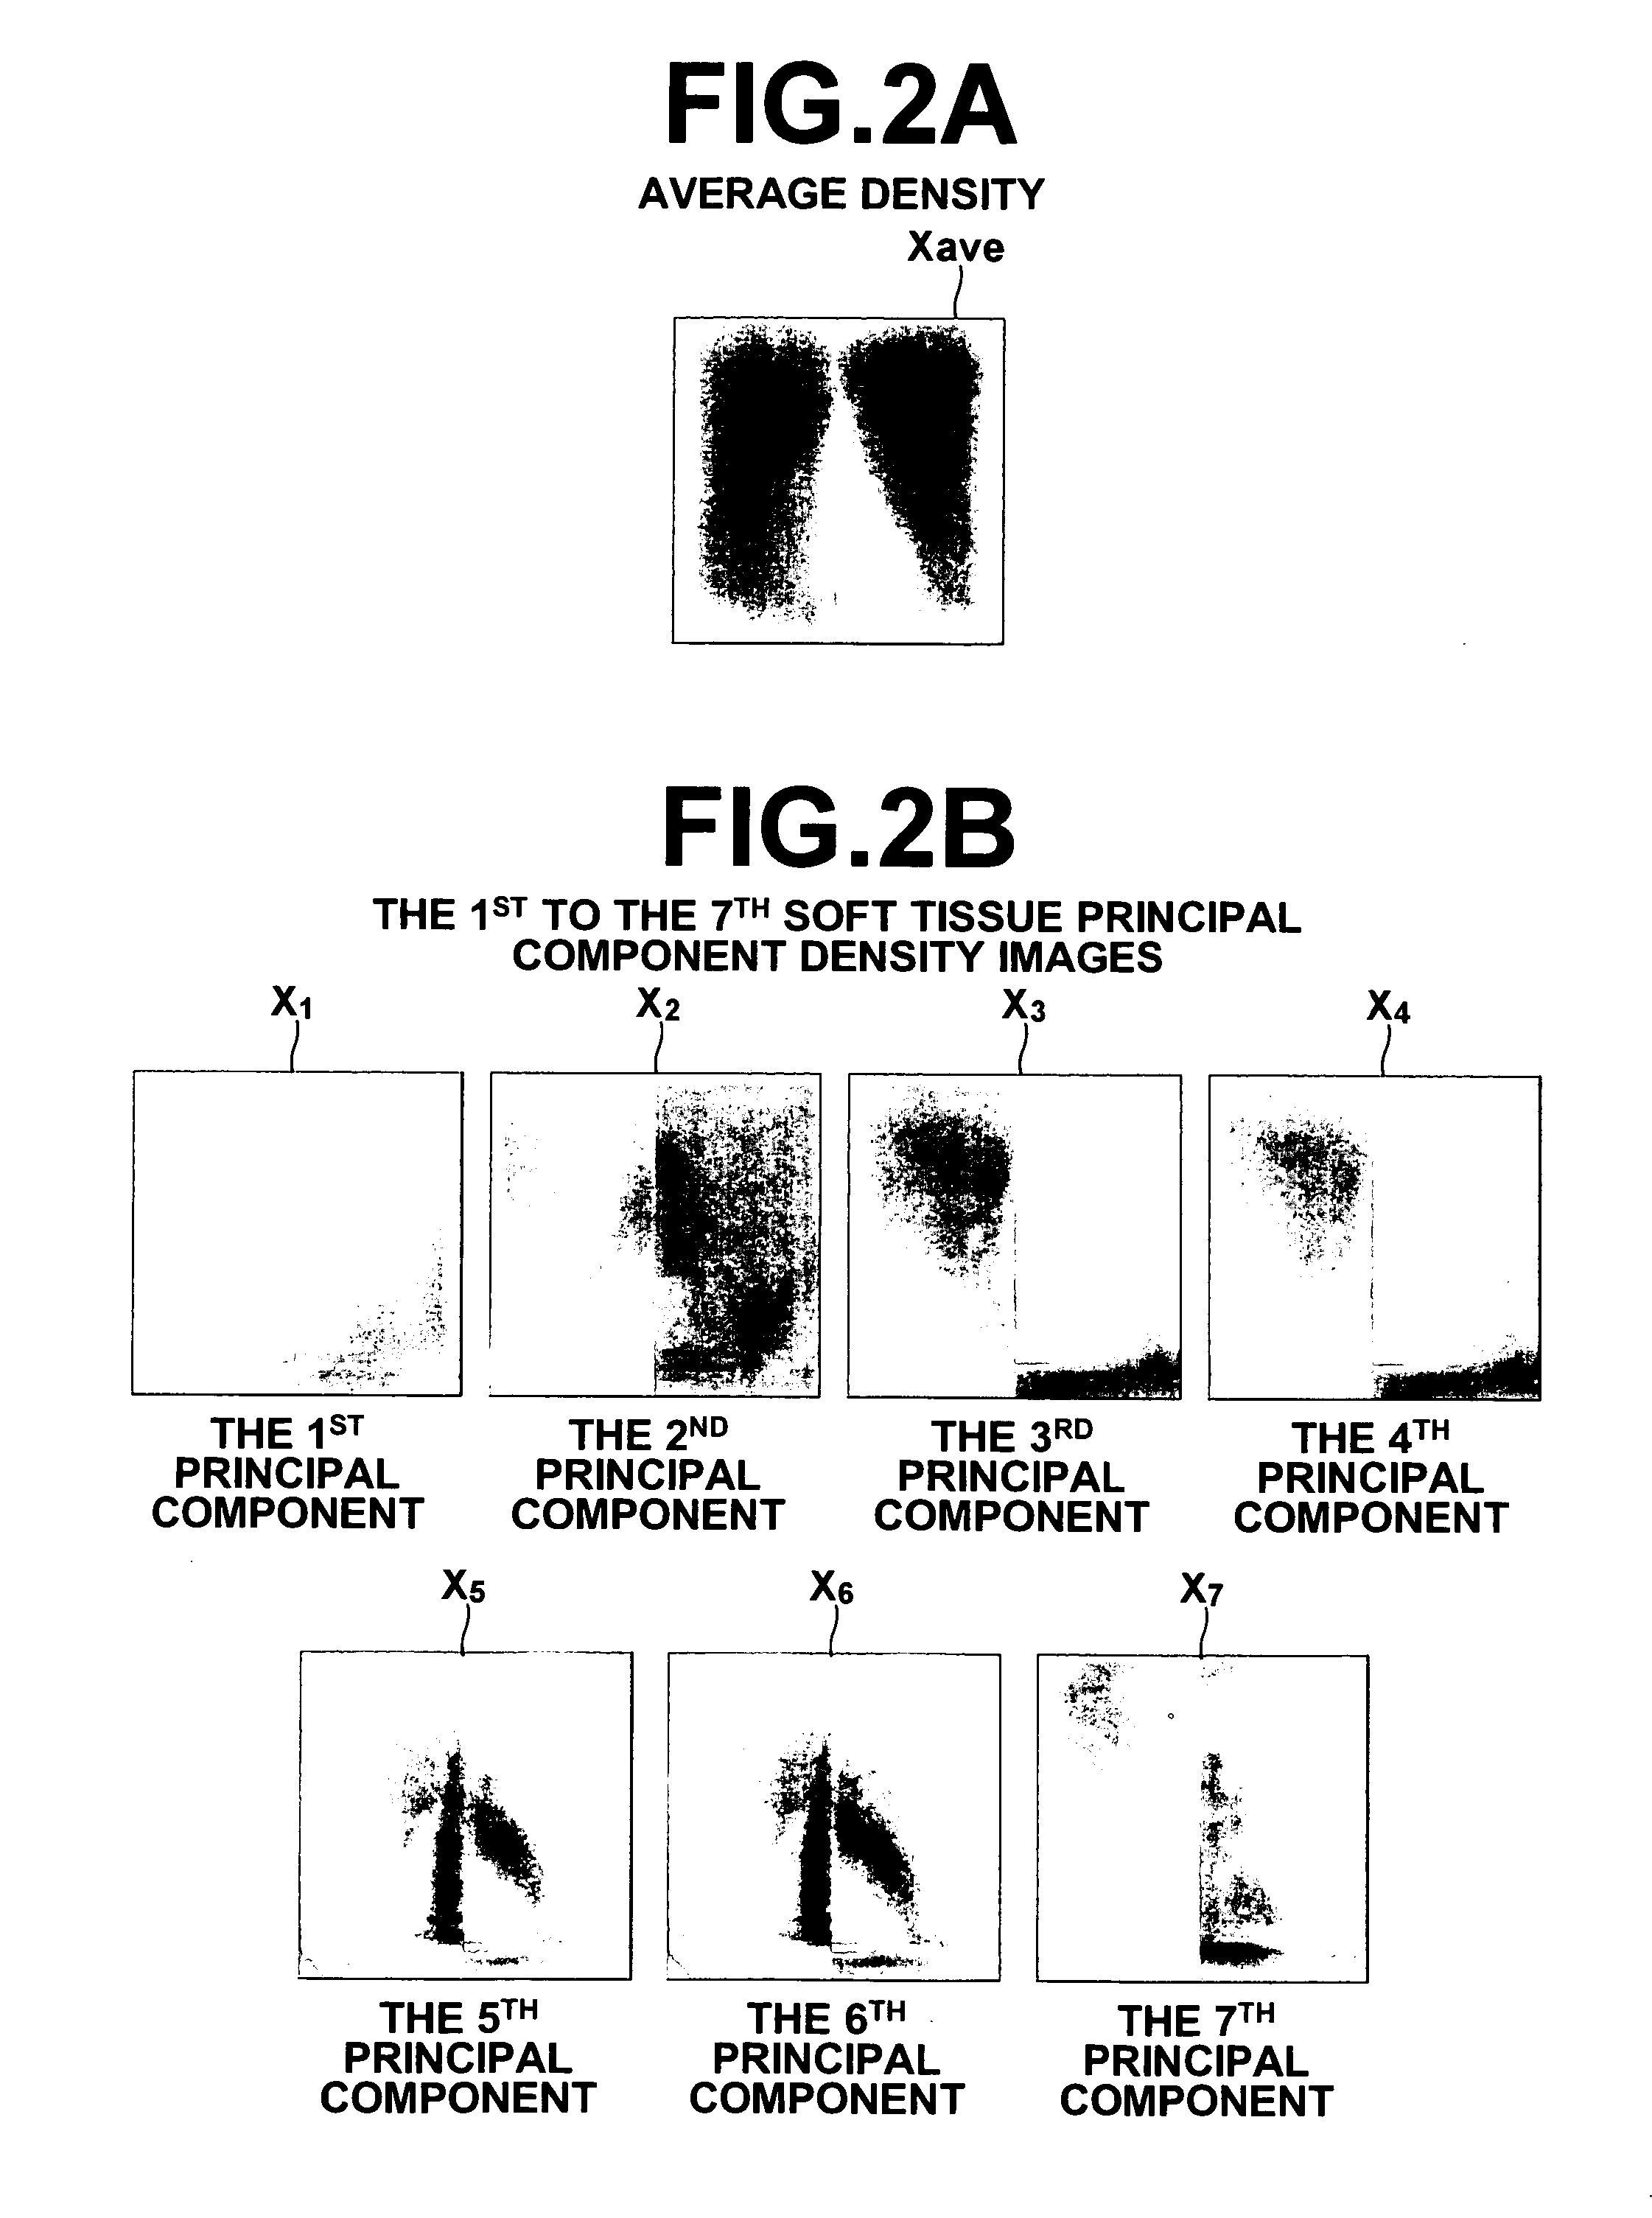 Apparatus, method, and program for image processing